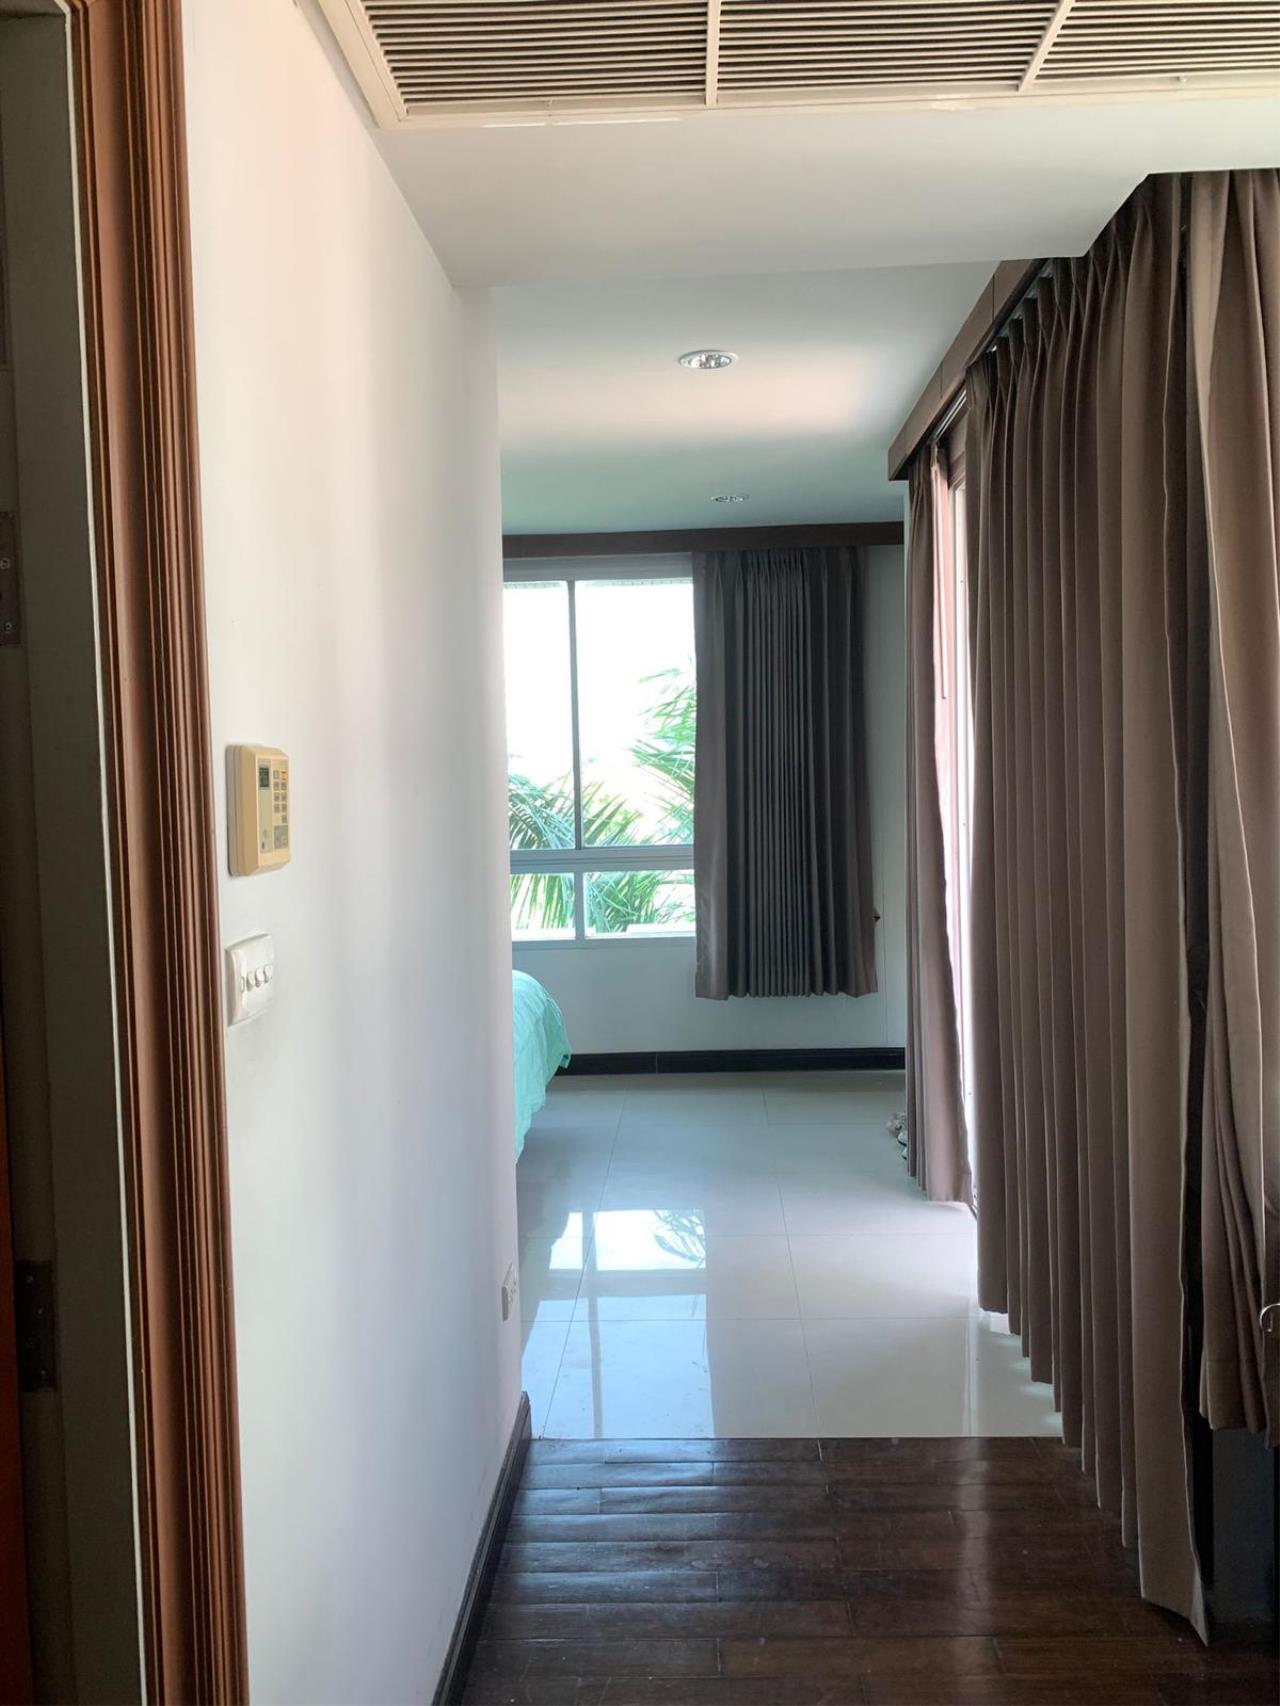 3 Bedrooms 3 Bathrooms Size 180sqm. Baan Thirapa for Rent